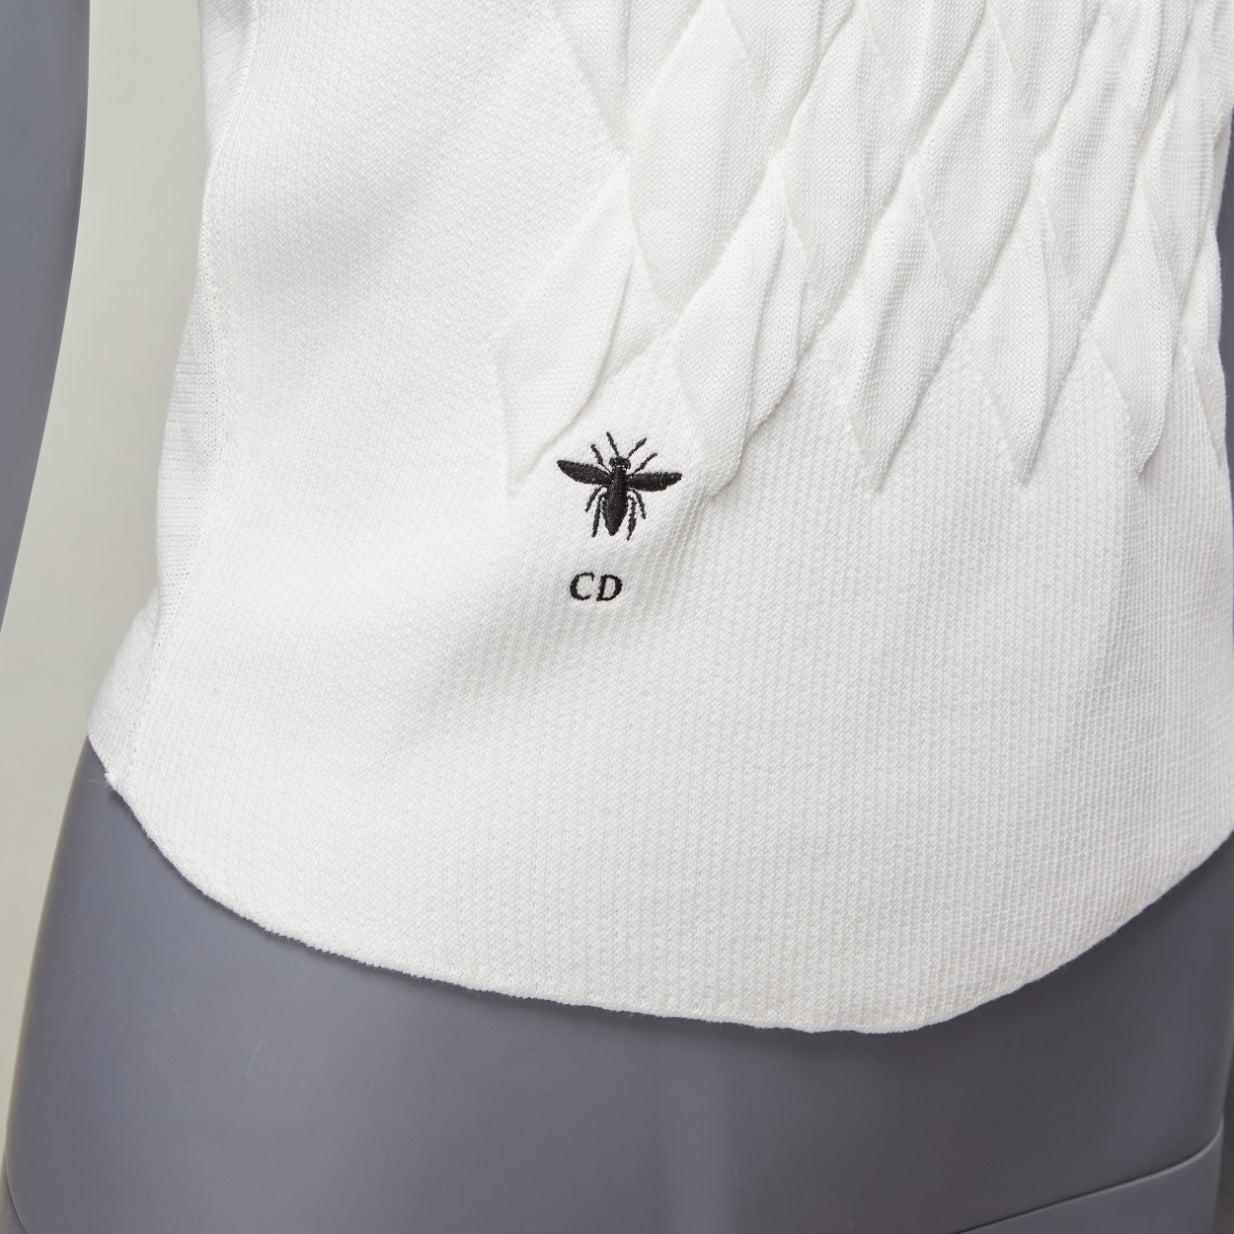 DIOR white cotton blend CD bee logo argyle chest plate fencing vest top FR34 XS
Reference: AAWC/A01142
Brand: Dior
Designer: Maria Grazia Chiuri
Material: Cotton, Blend
Color: White, Black
Pattern: Solid
Closure: Pullover
Made in: